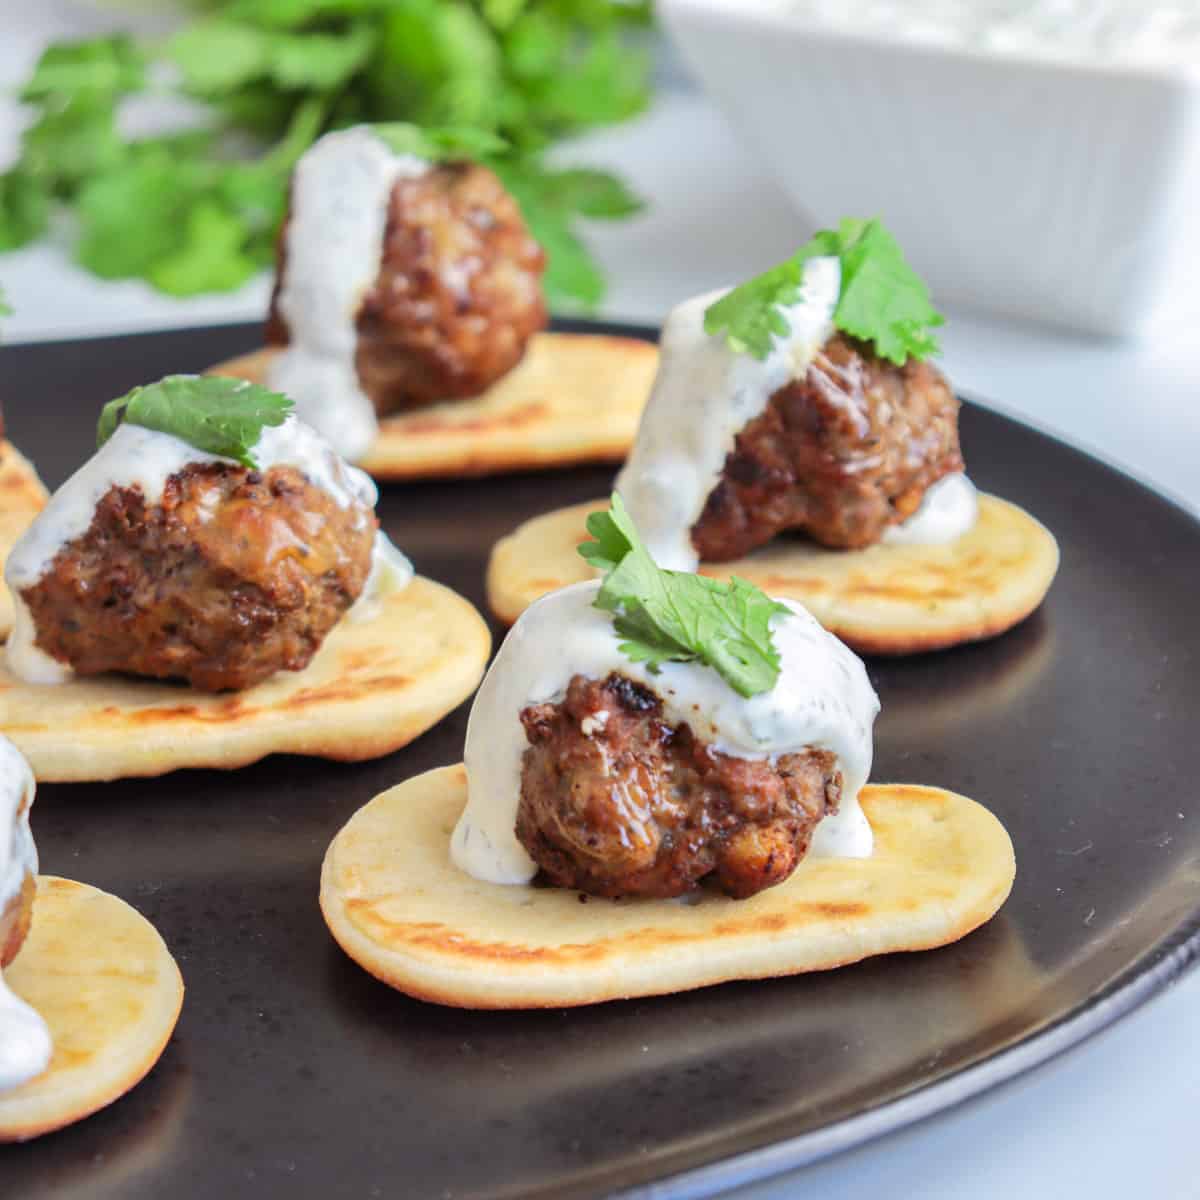 Lamb meatballs on top of naan with a drizzle of yogurt sauce.